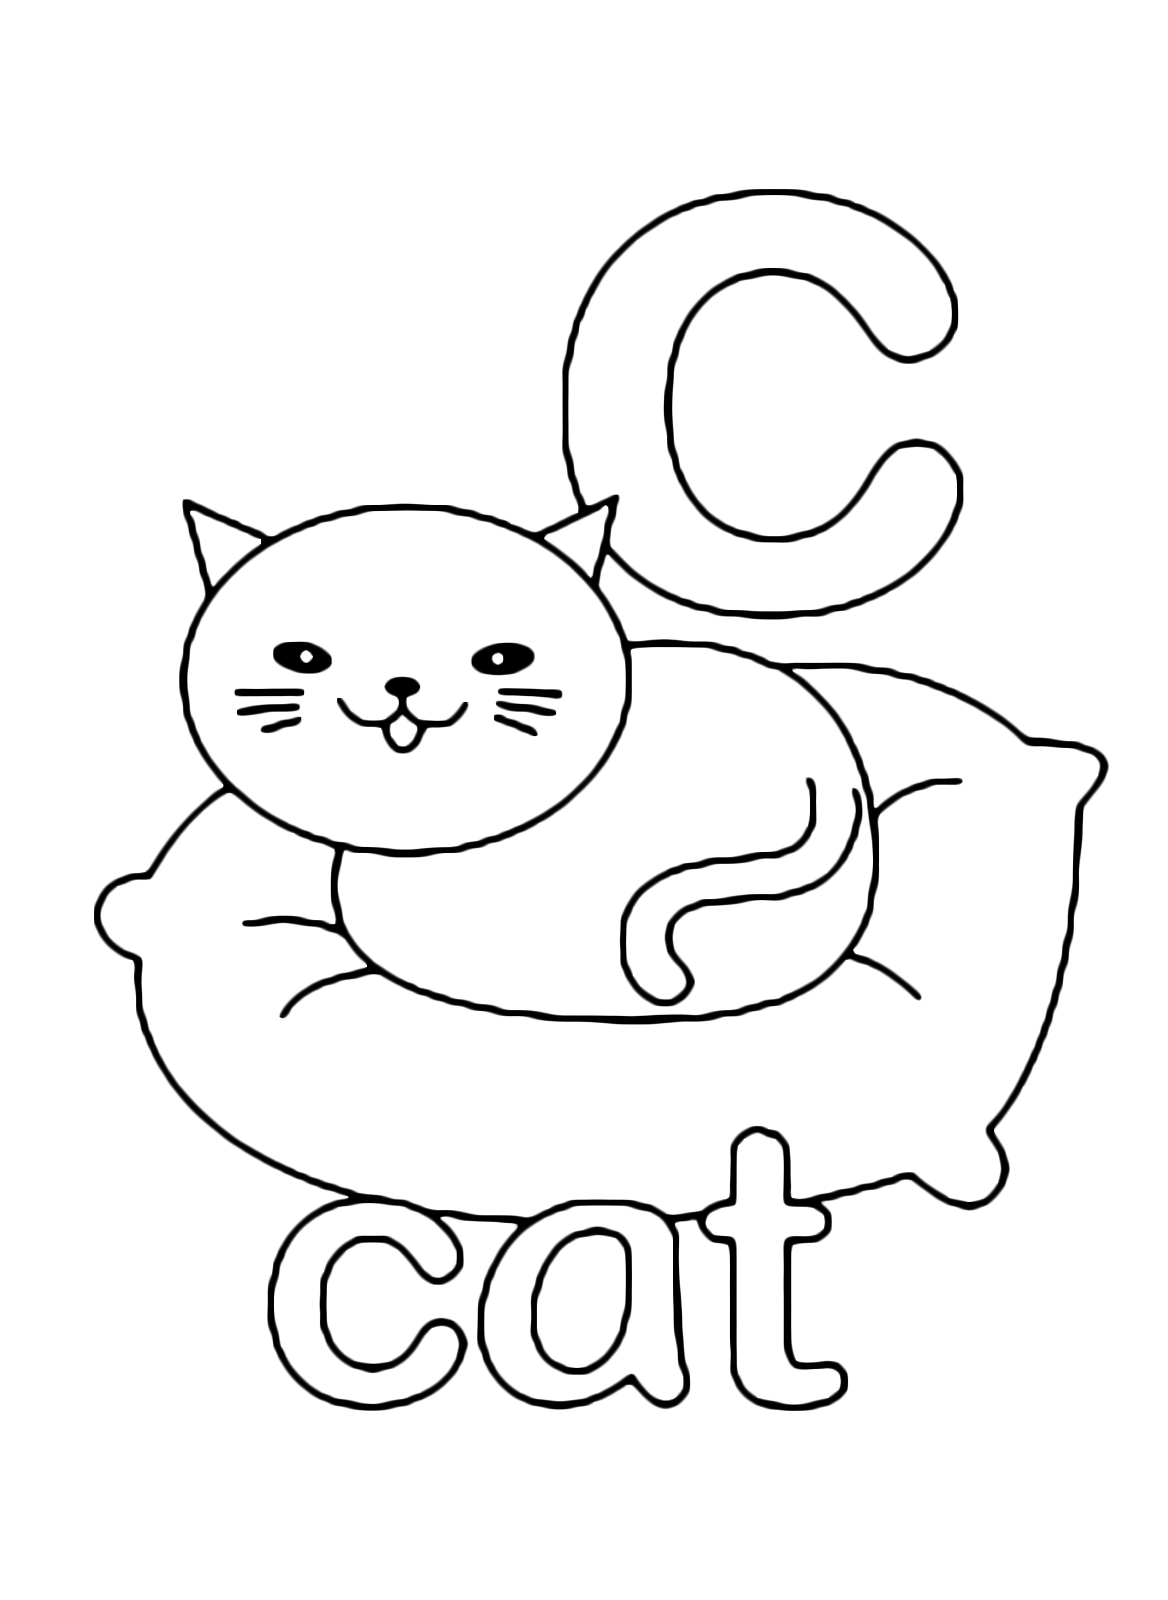 Letters and numbers - c for cat lowercase letter